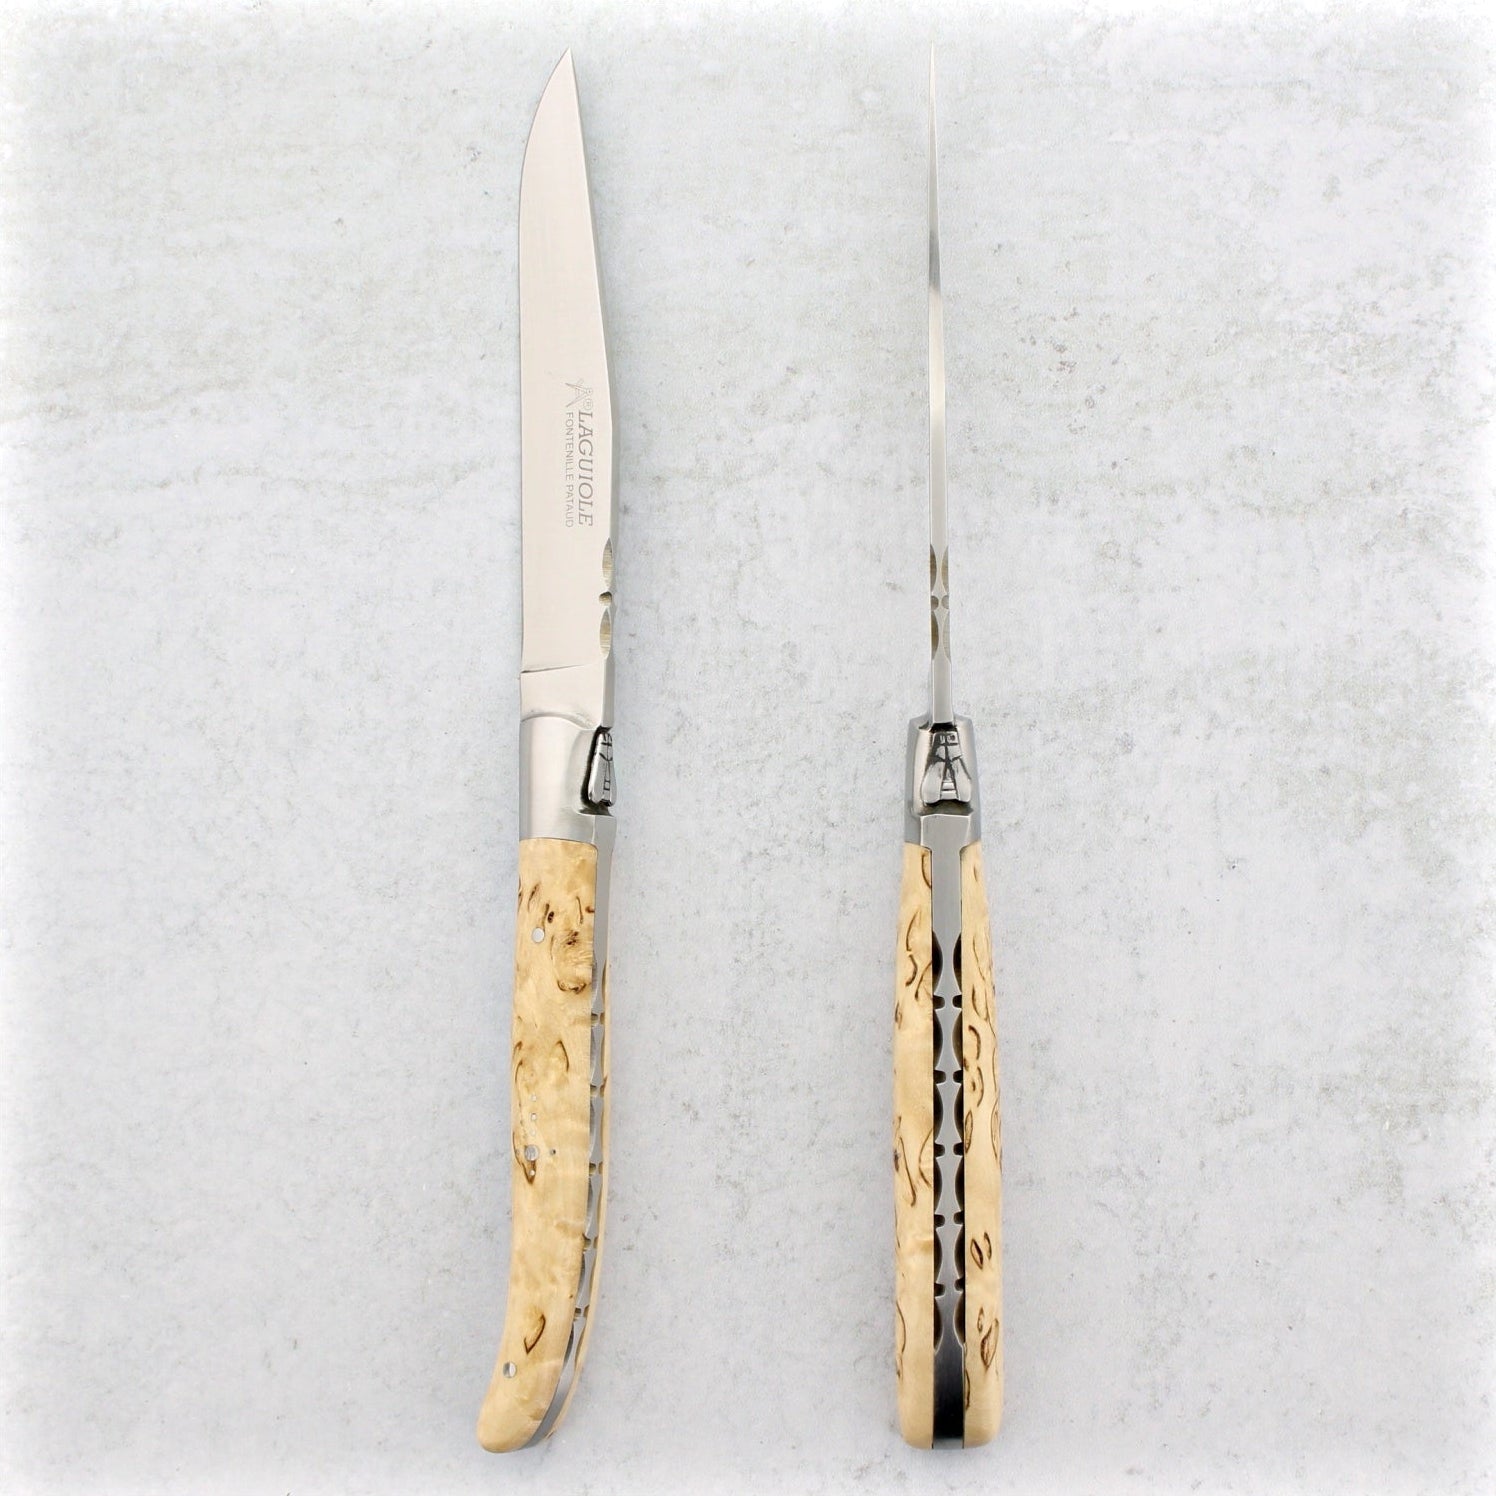 Laguiole Forged Steak Knives Karelian Birch by fontenille pataud - Laguiole  Imports